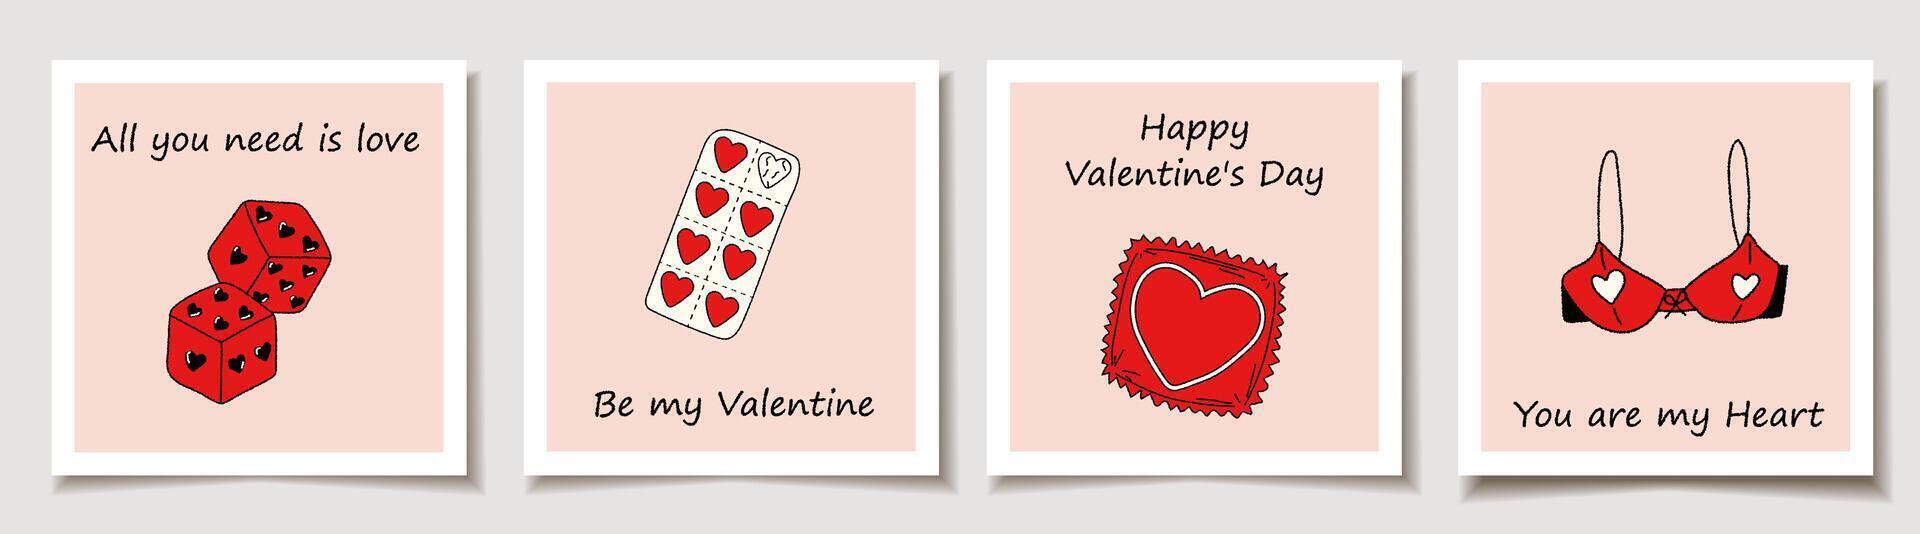 Set of Valentine's day cards with Vintage stickers. Love, Valentine's Day vector